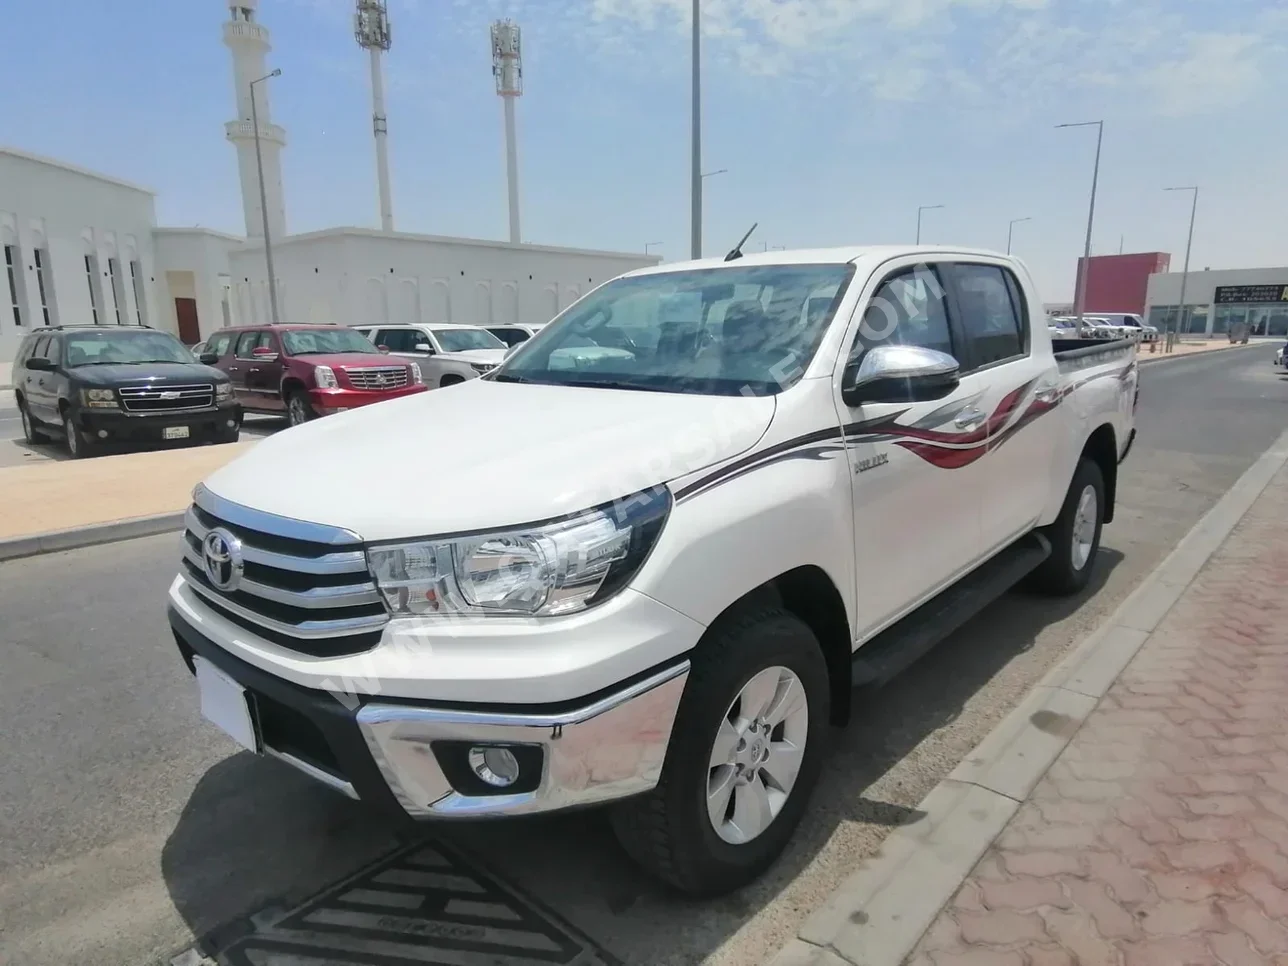 Toyota  Hilux  2020  Automatic  3,000 Km  4 Cylinder  Four Wheel Drive (4WD)  Pick Up  White